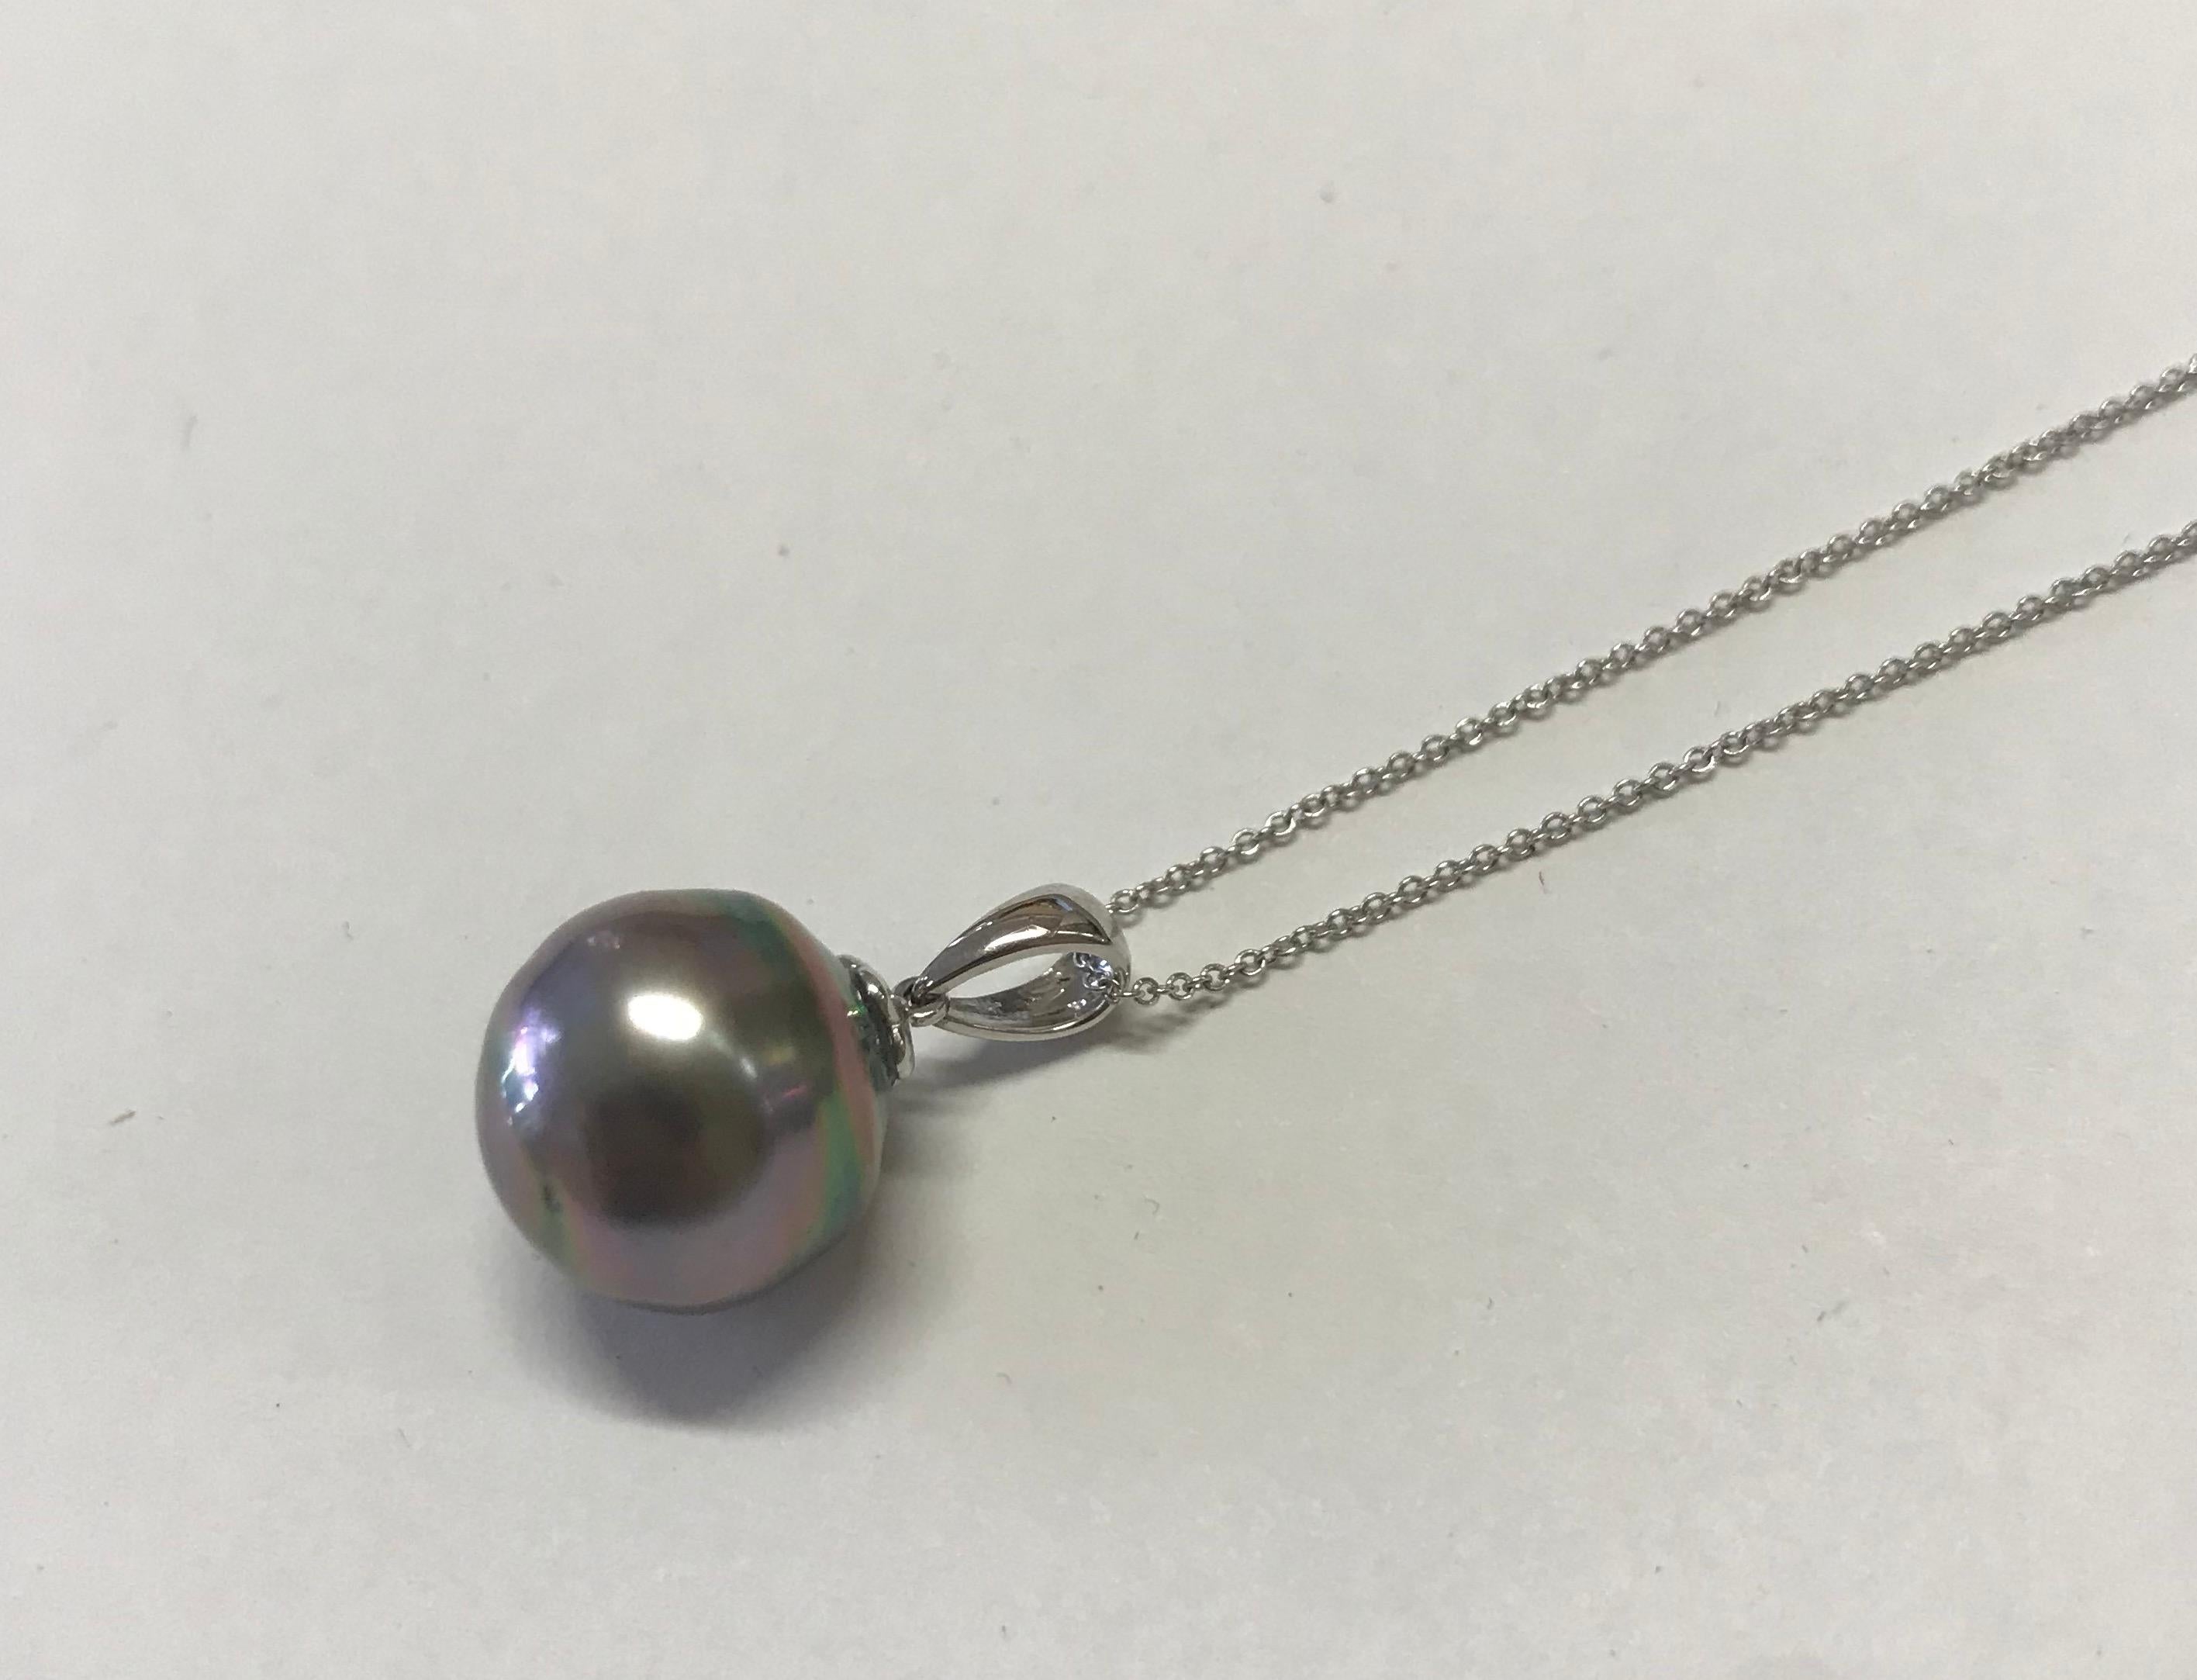 Material: 18K White Gold
Center Stone Details: Tahitian Pearl
Chain: 18 inches

Fine one-of-a-kind craftsmanship meets incredible quality in this breathtaking piece of jewelry.

All Alberto pieces are made in the U.S.A and include a lifetime